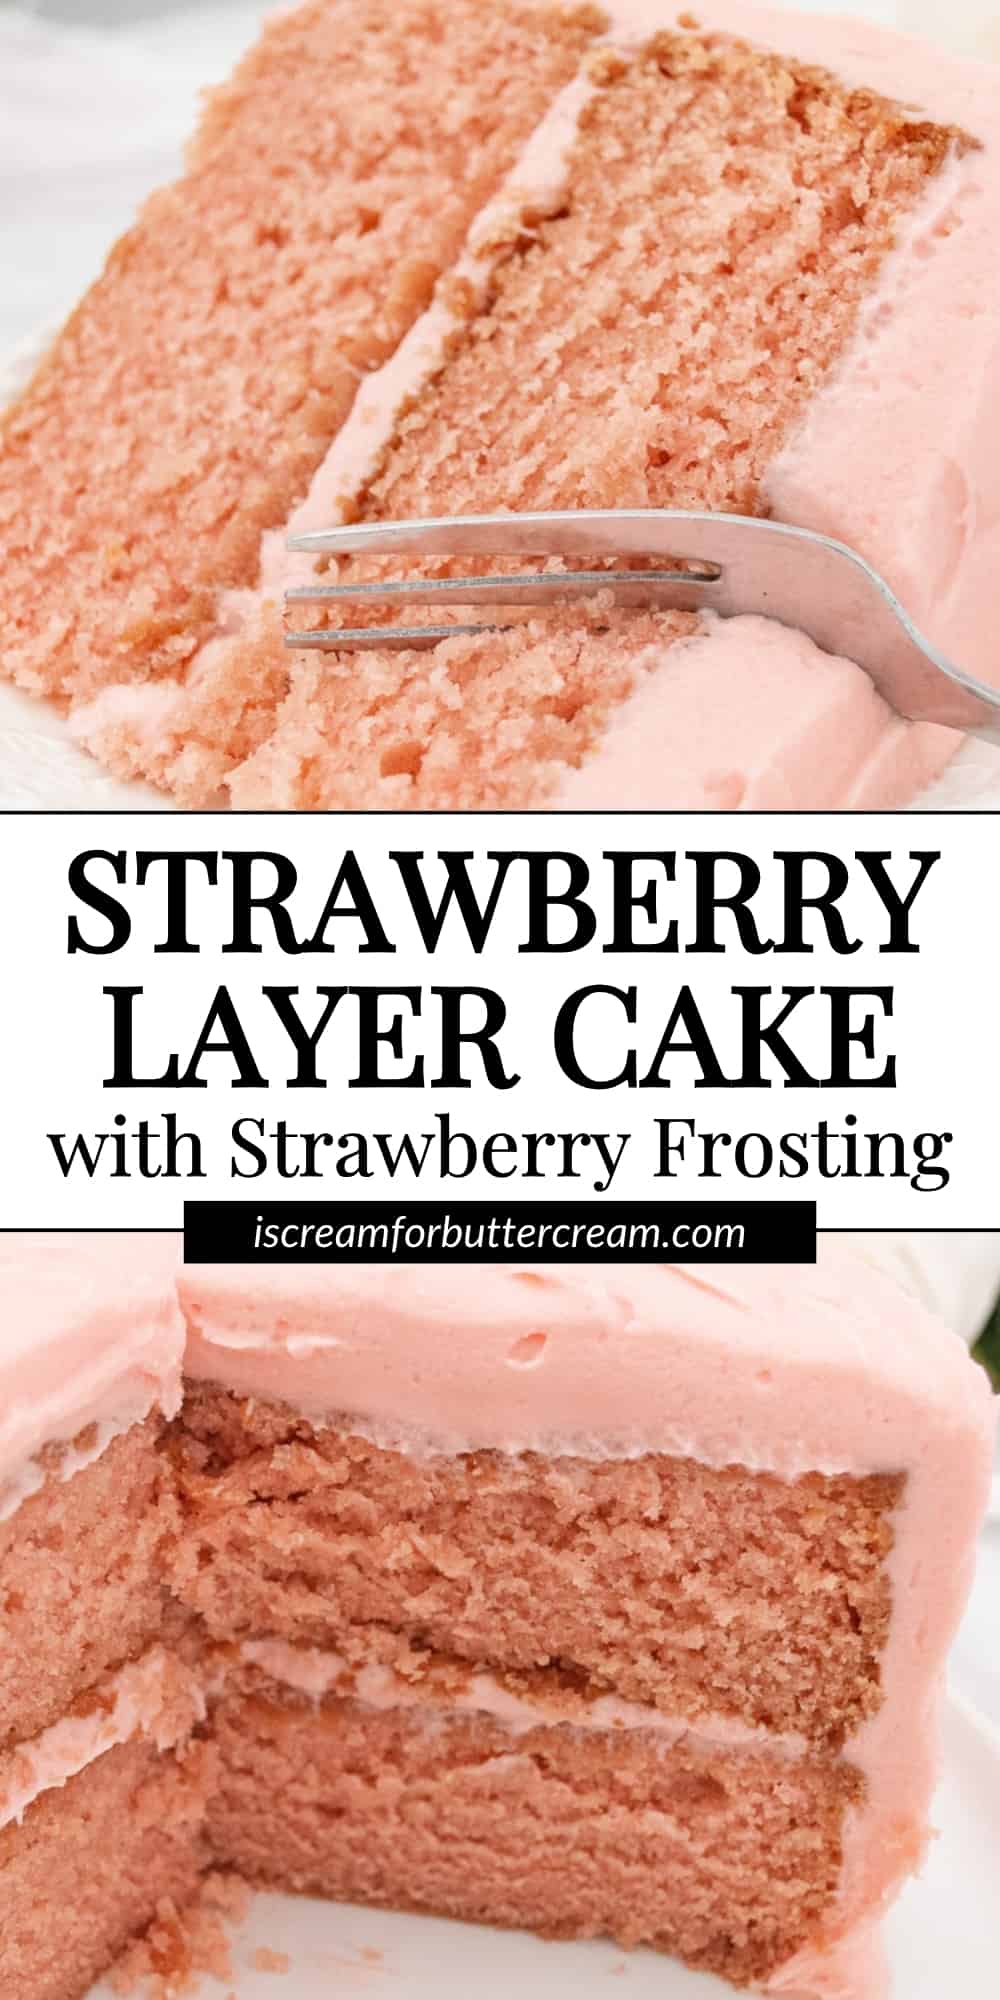 Collage of strawberry layer cake with text overlay for a pin graphic.